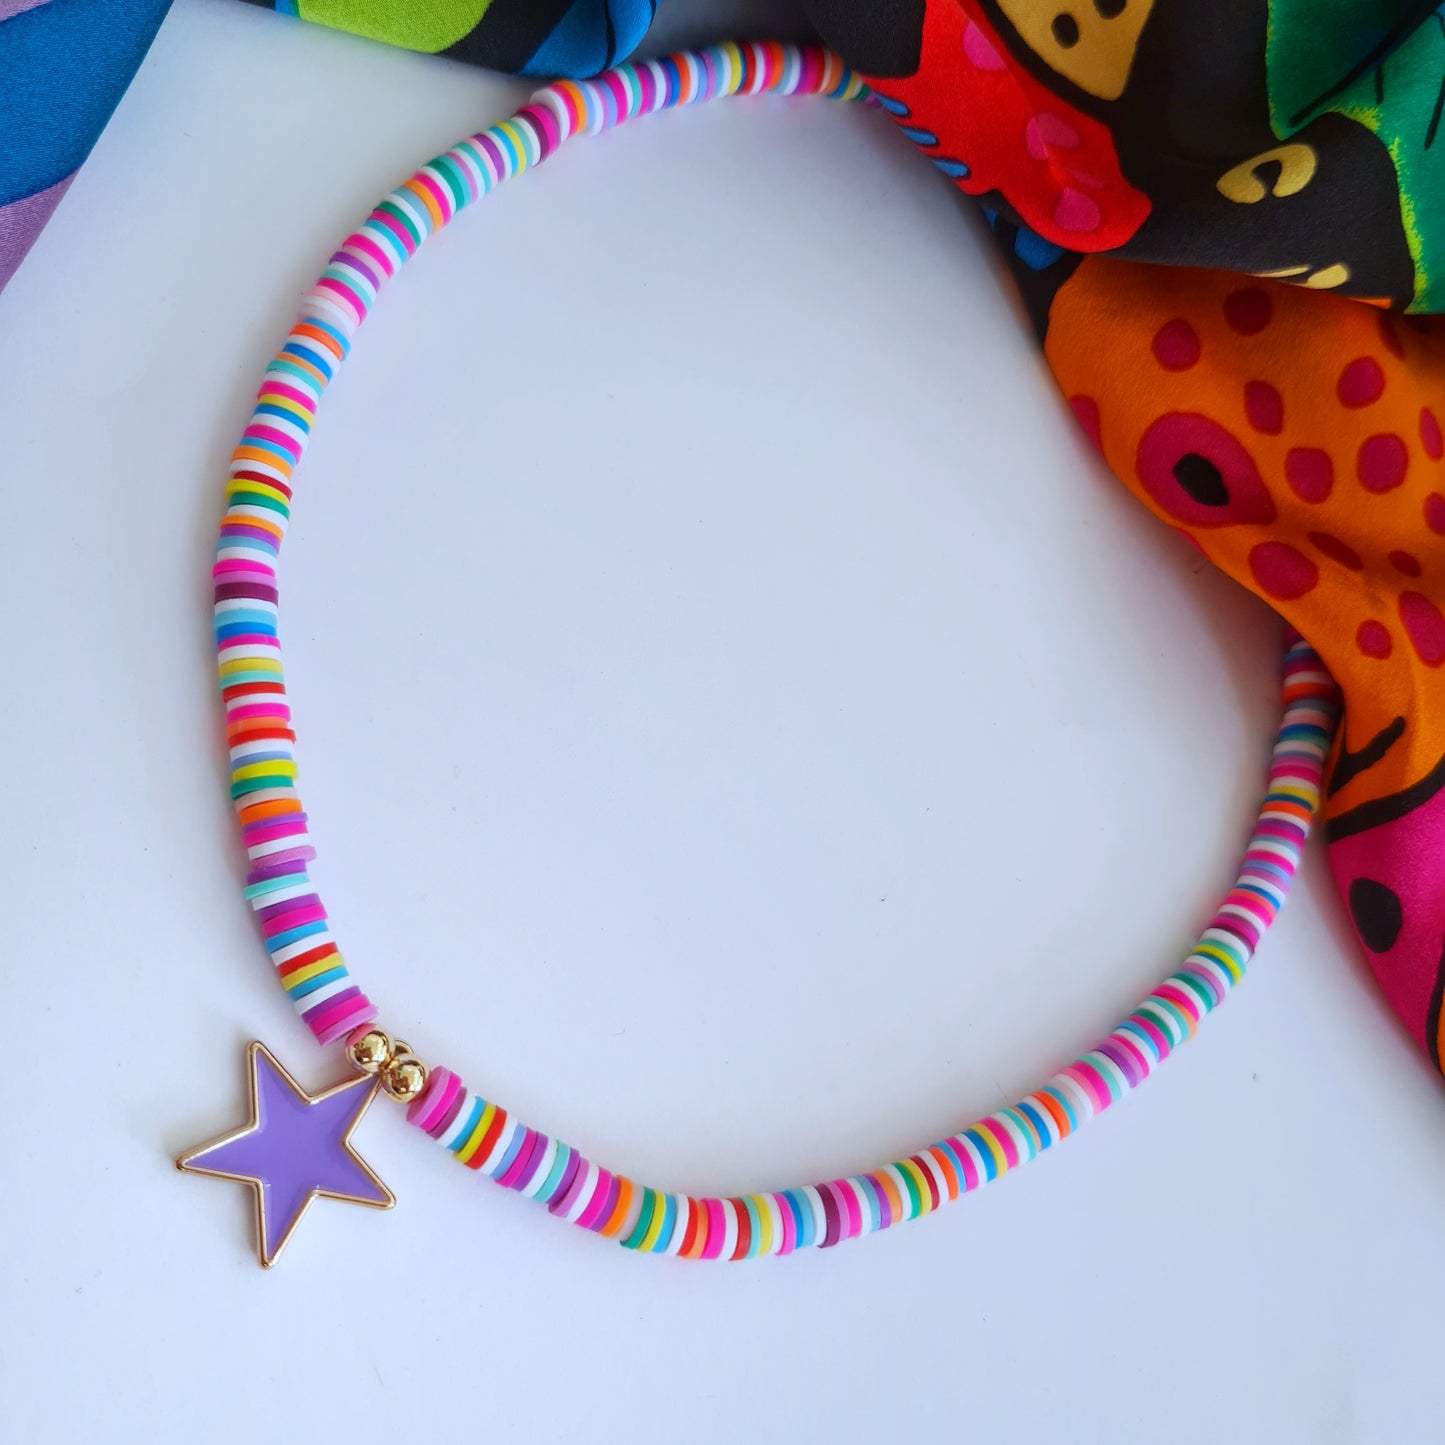 Fimo Surfer "Star" necklace